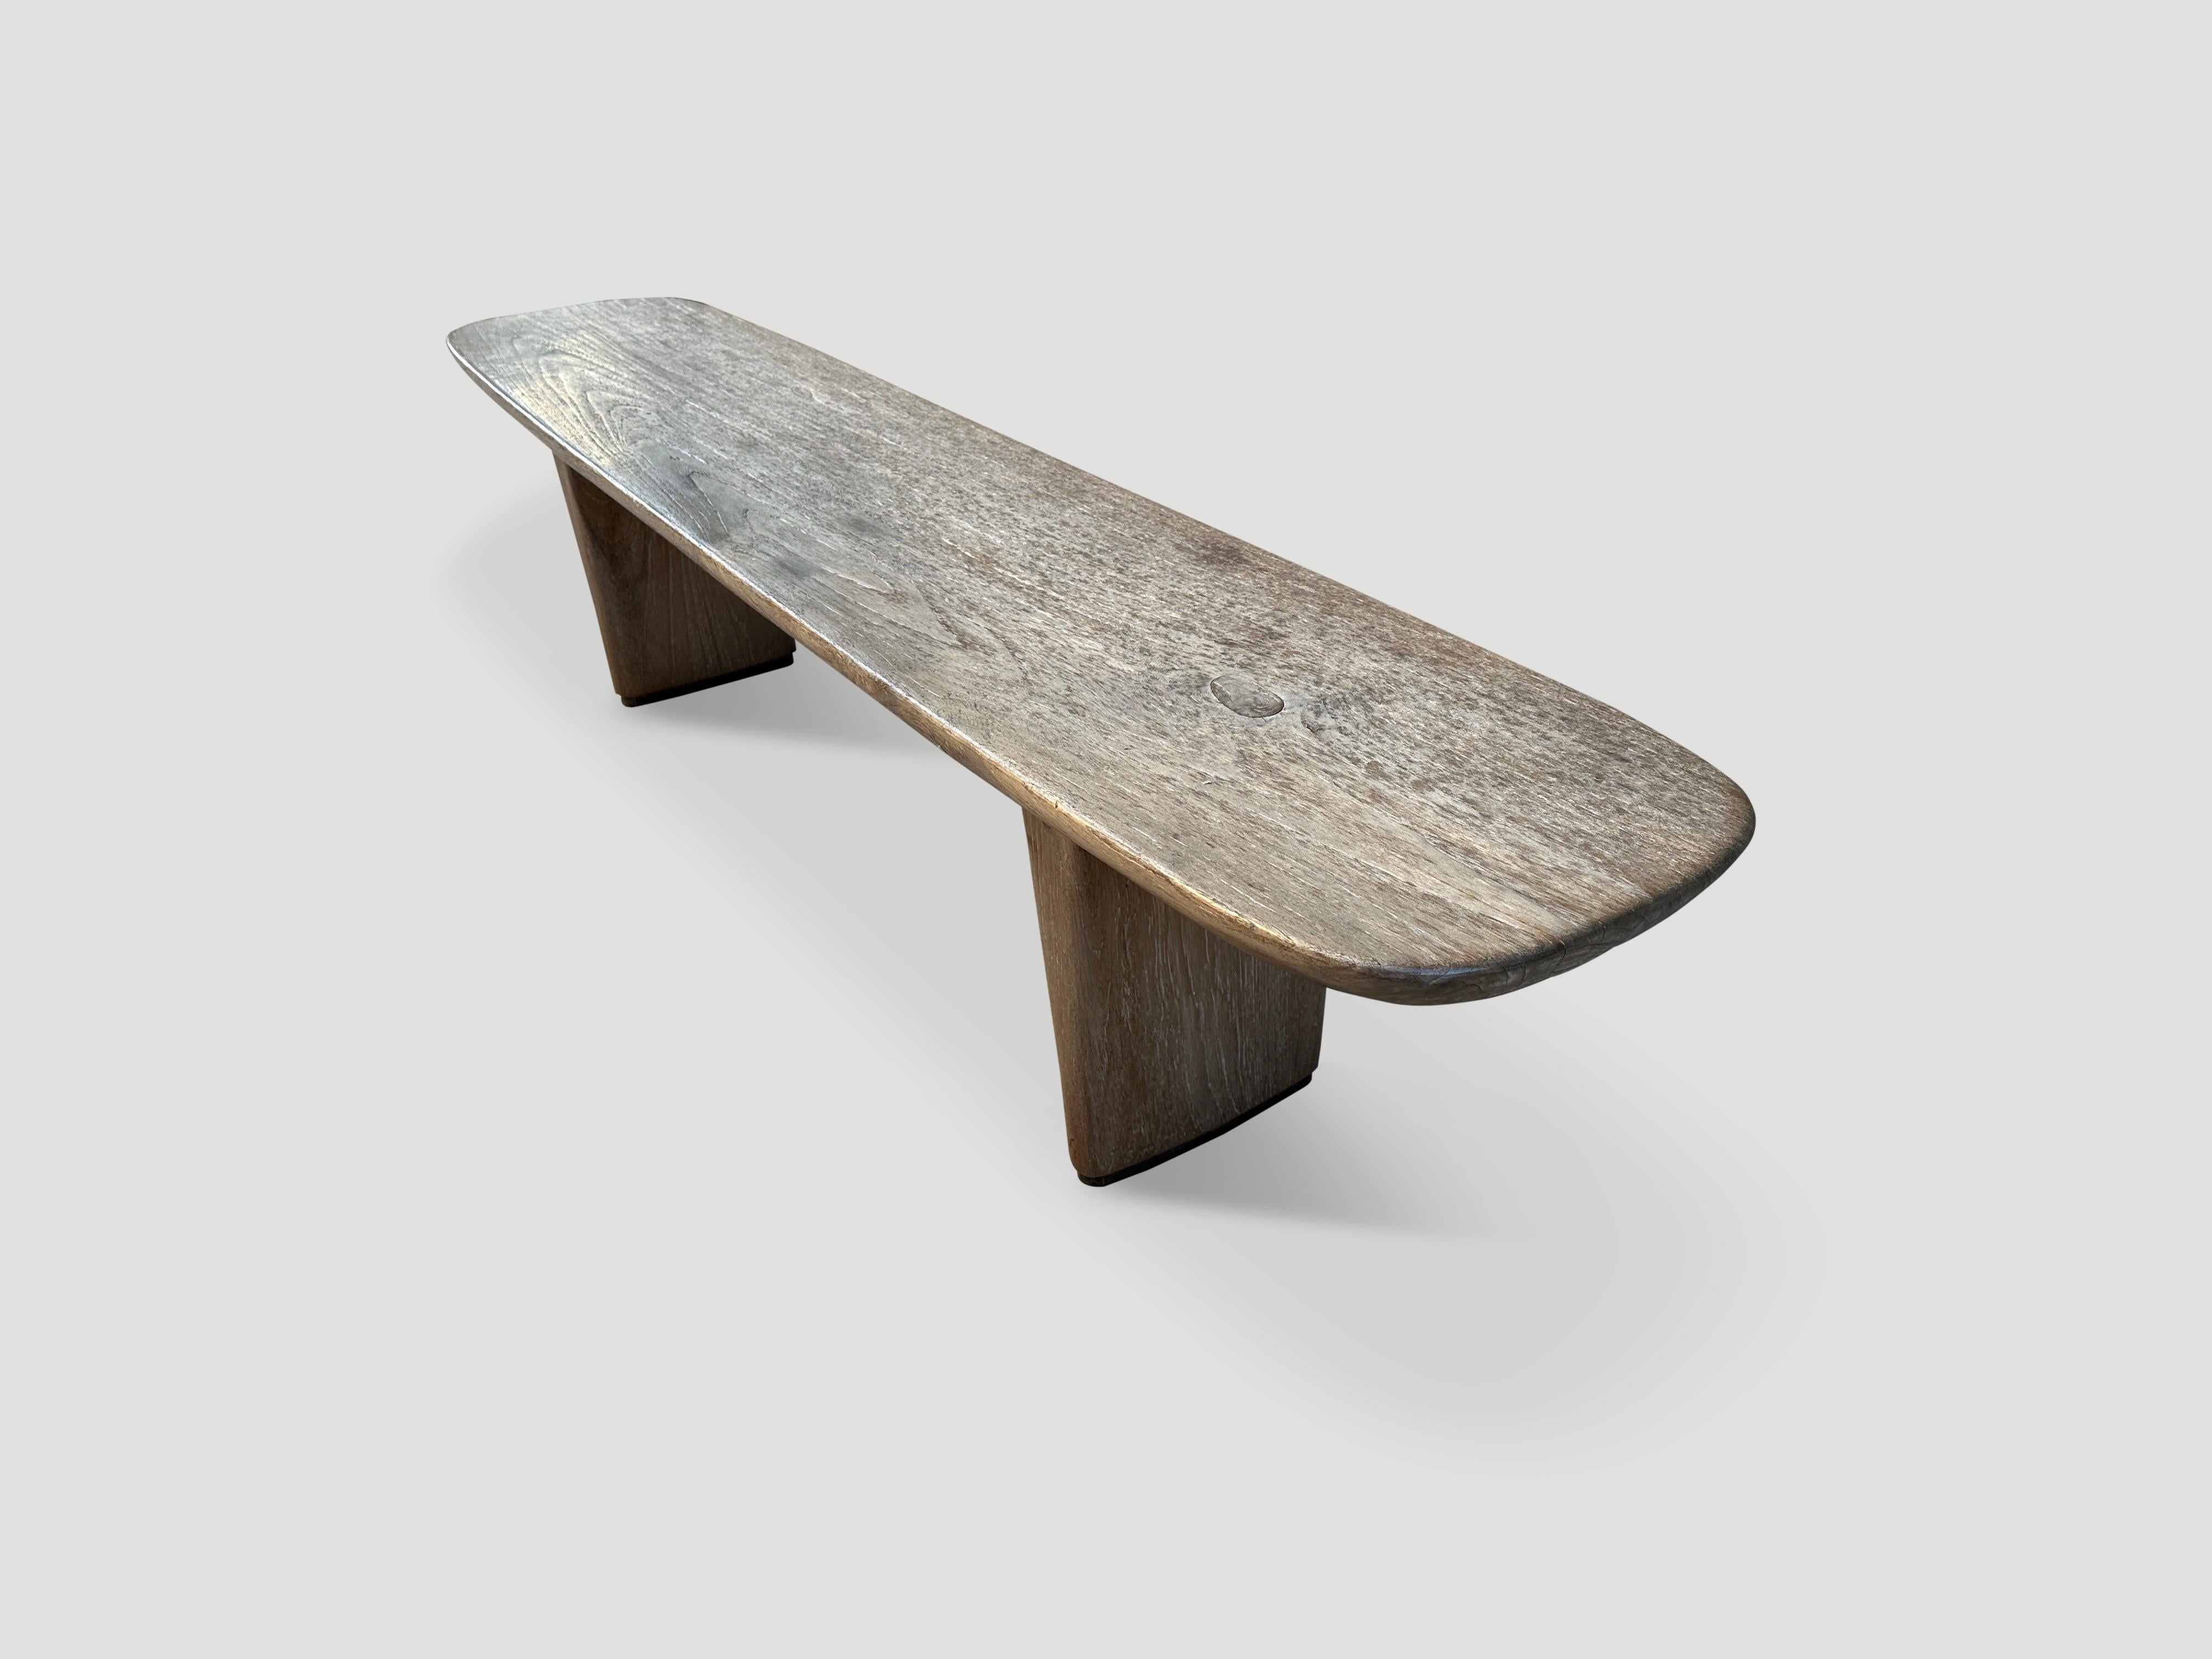 A beautiful single slab of teak wood taken from my finest collection is hand carved to produce this impressive bench. We added two minimalist tapered legs with a recess at the bottom in a darker tone. Finished with a translucent grey stain revealing